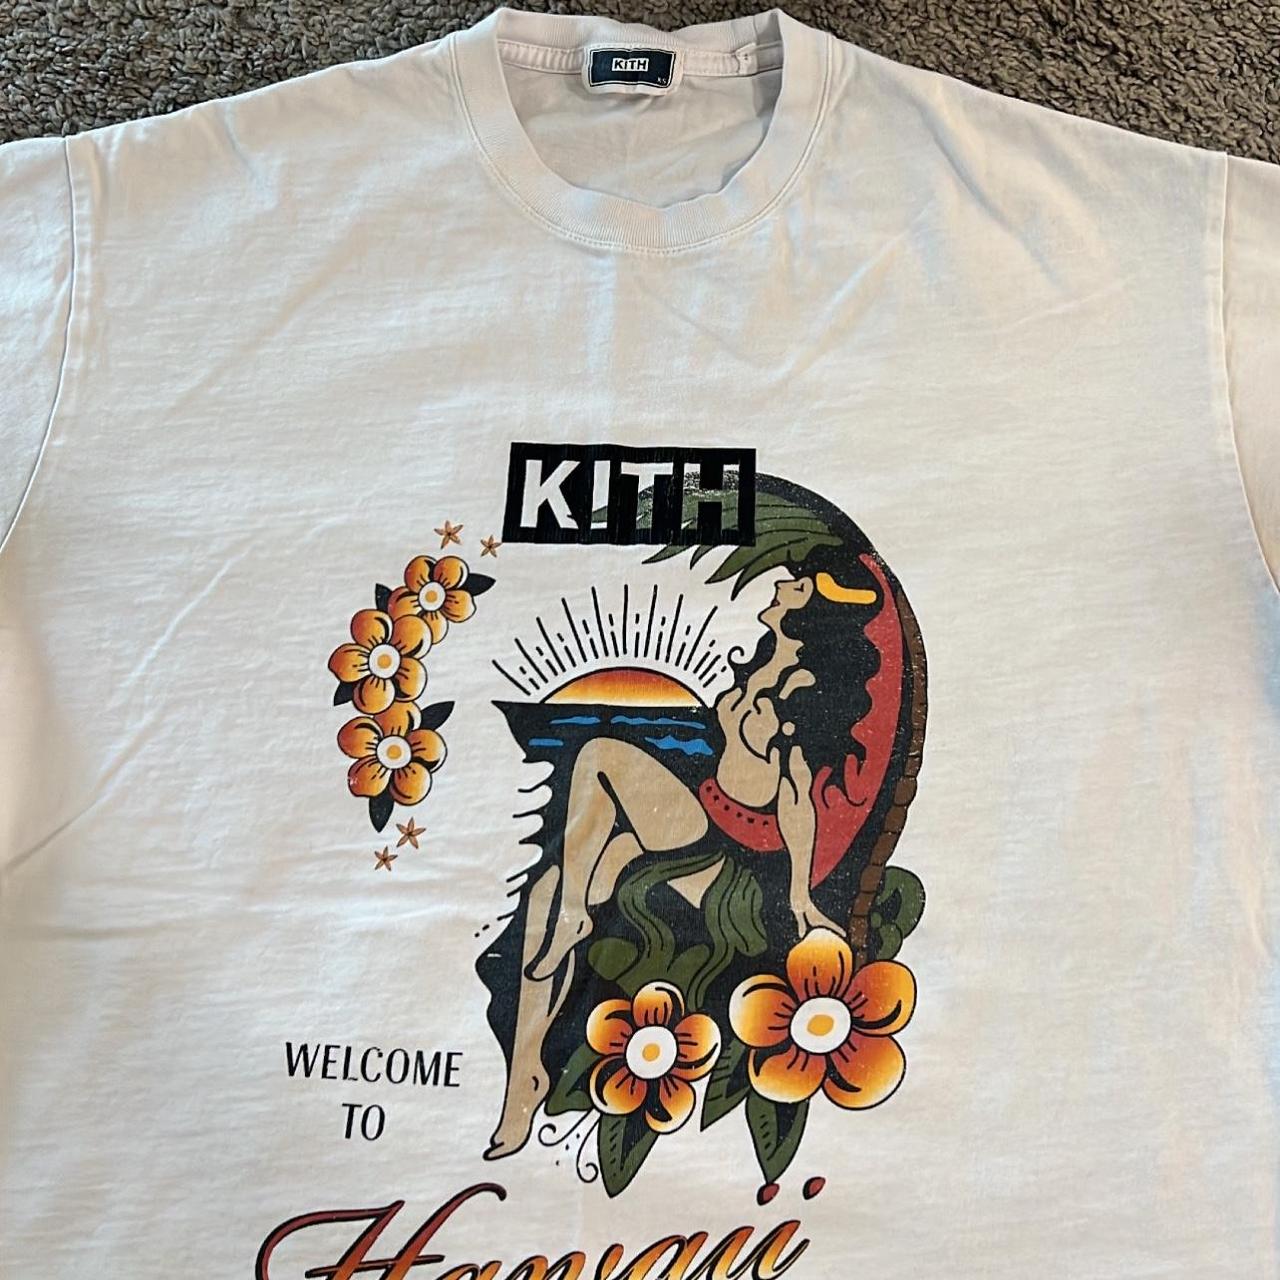 Pictured is a Kith Hawaii t-shirt sized XS. This